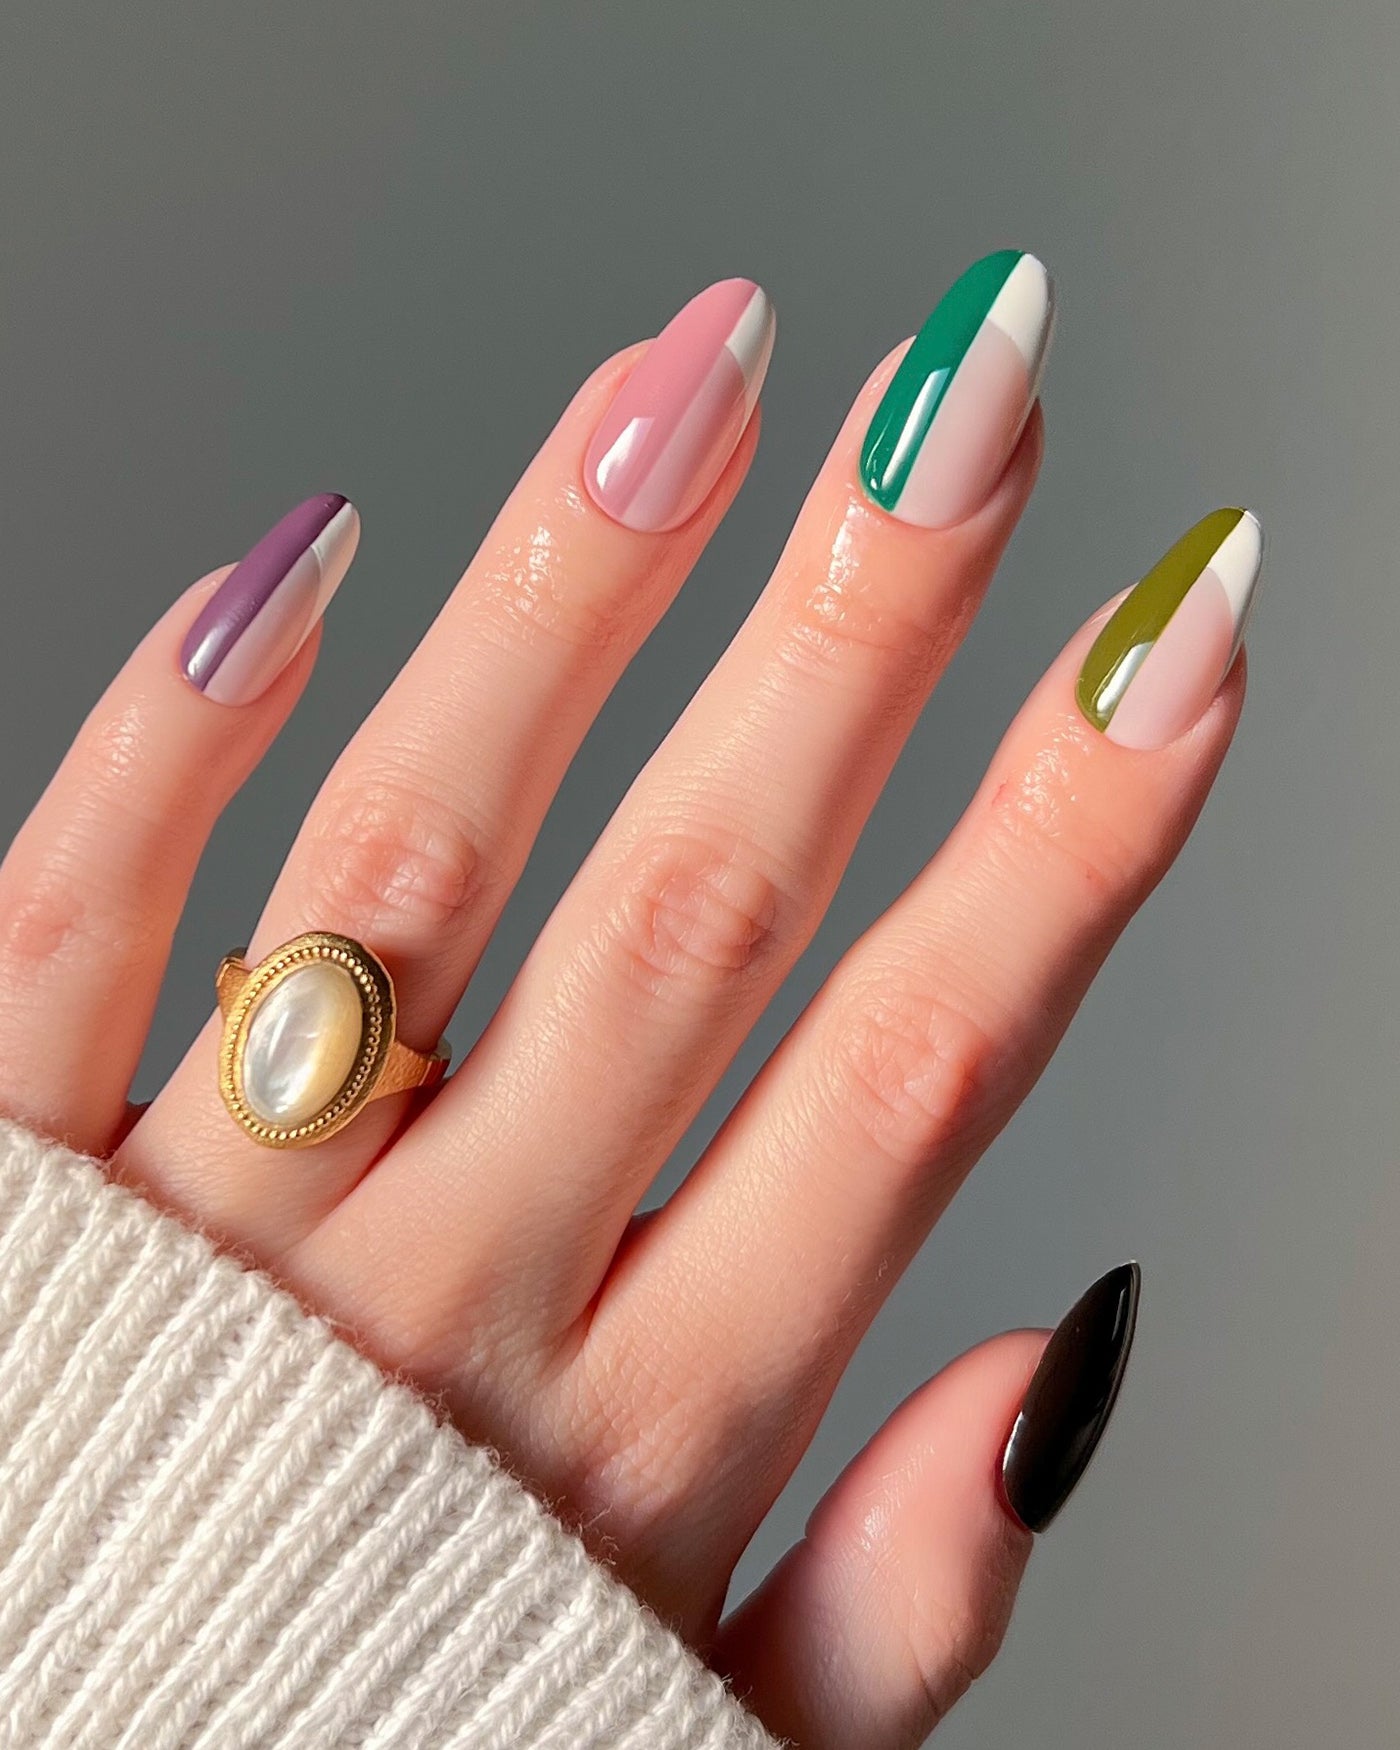 Gender reveal nails are now a thing